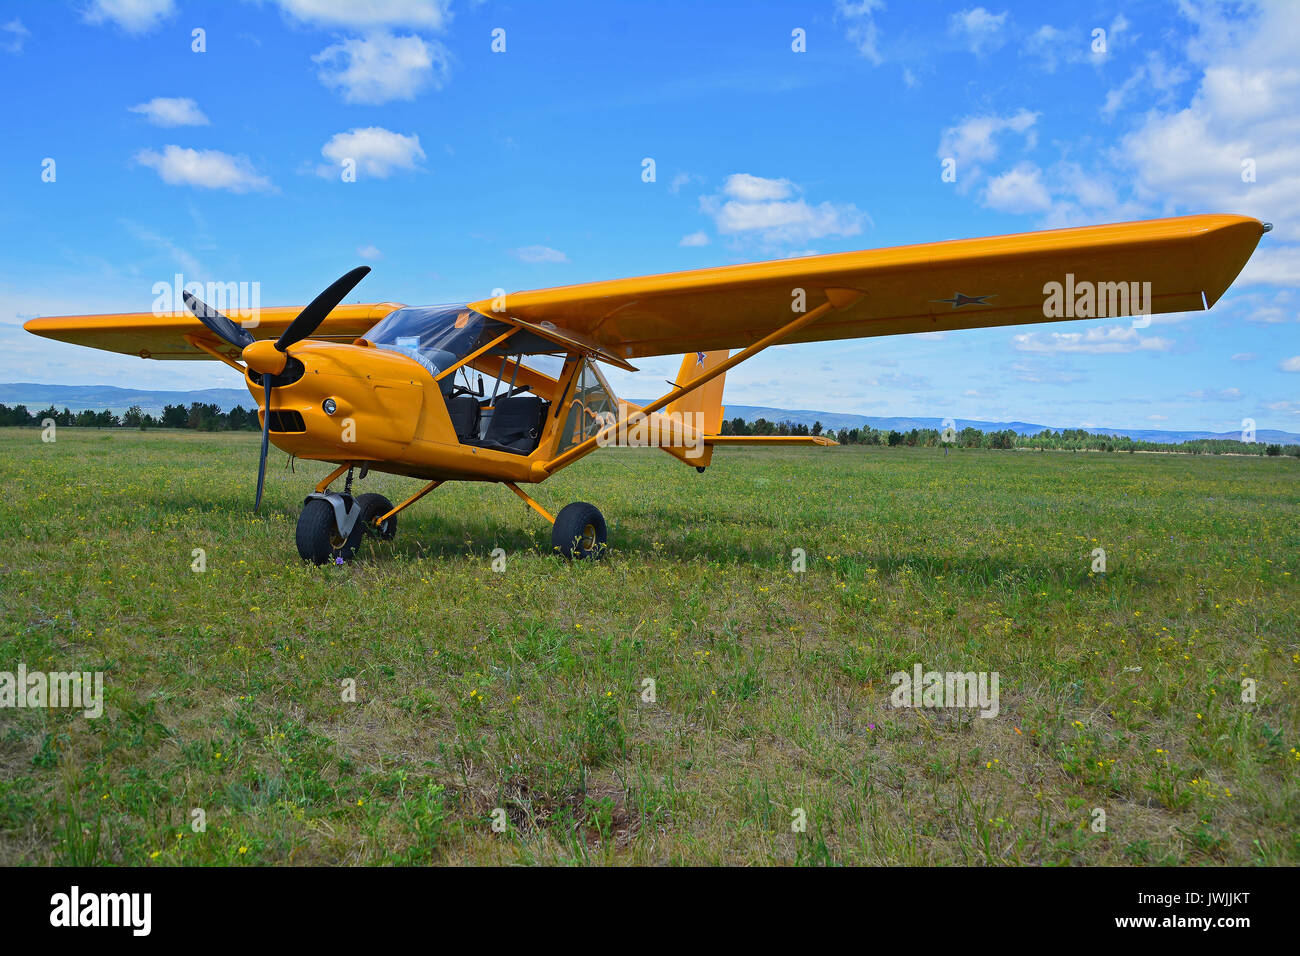 Light sport yellow airplane stands on grass against a blue sky Stock Photo